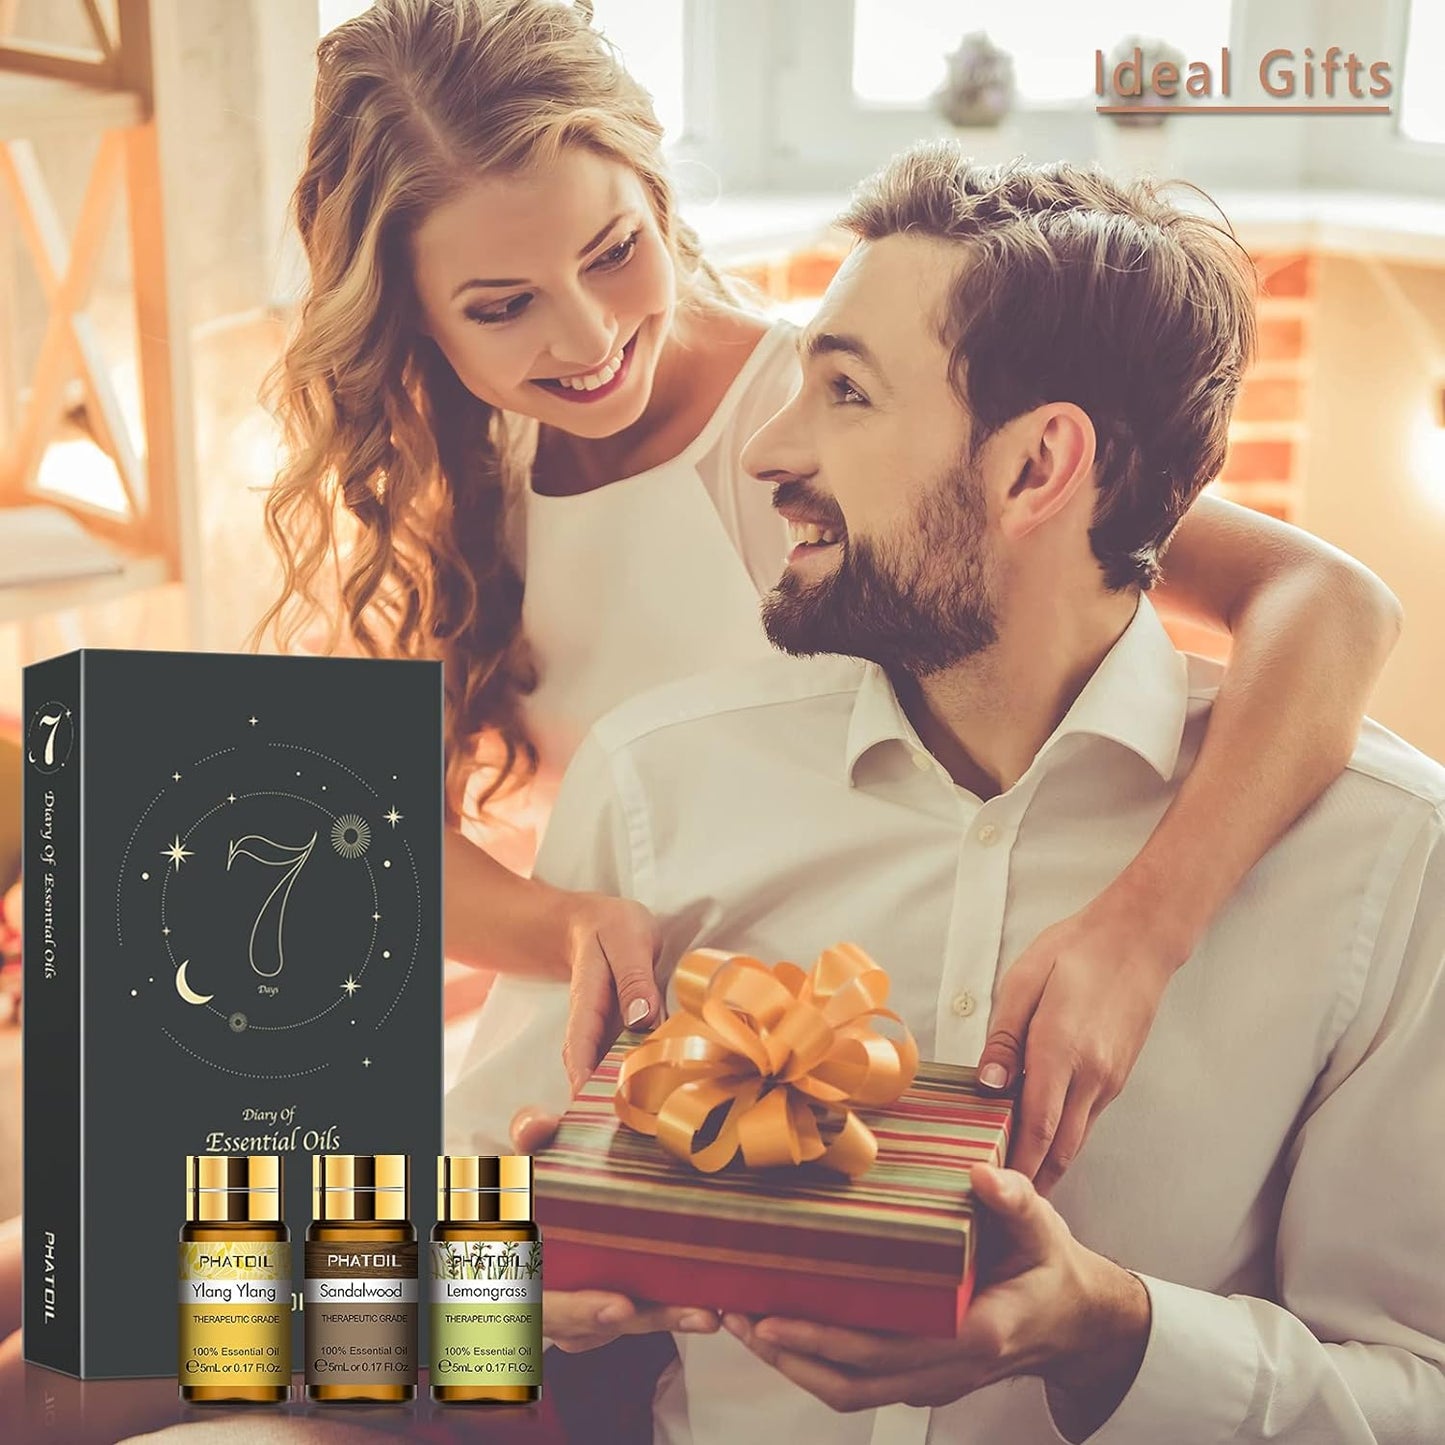 12PCS Bergamot Essential Oils Set with Diffused Wood and Nice Box, 5Ml Essential Oils for Diffusers for Home, Gifts for Families and Friends